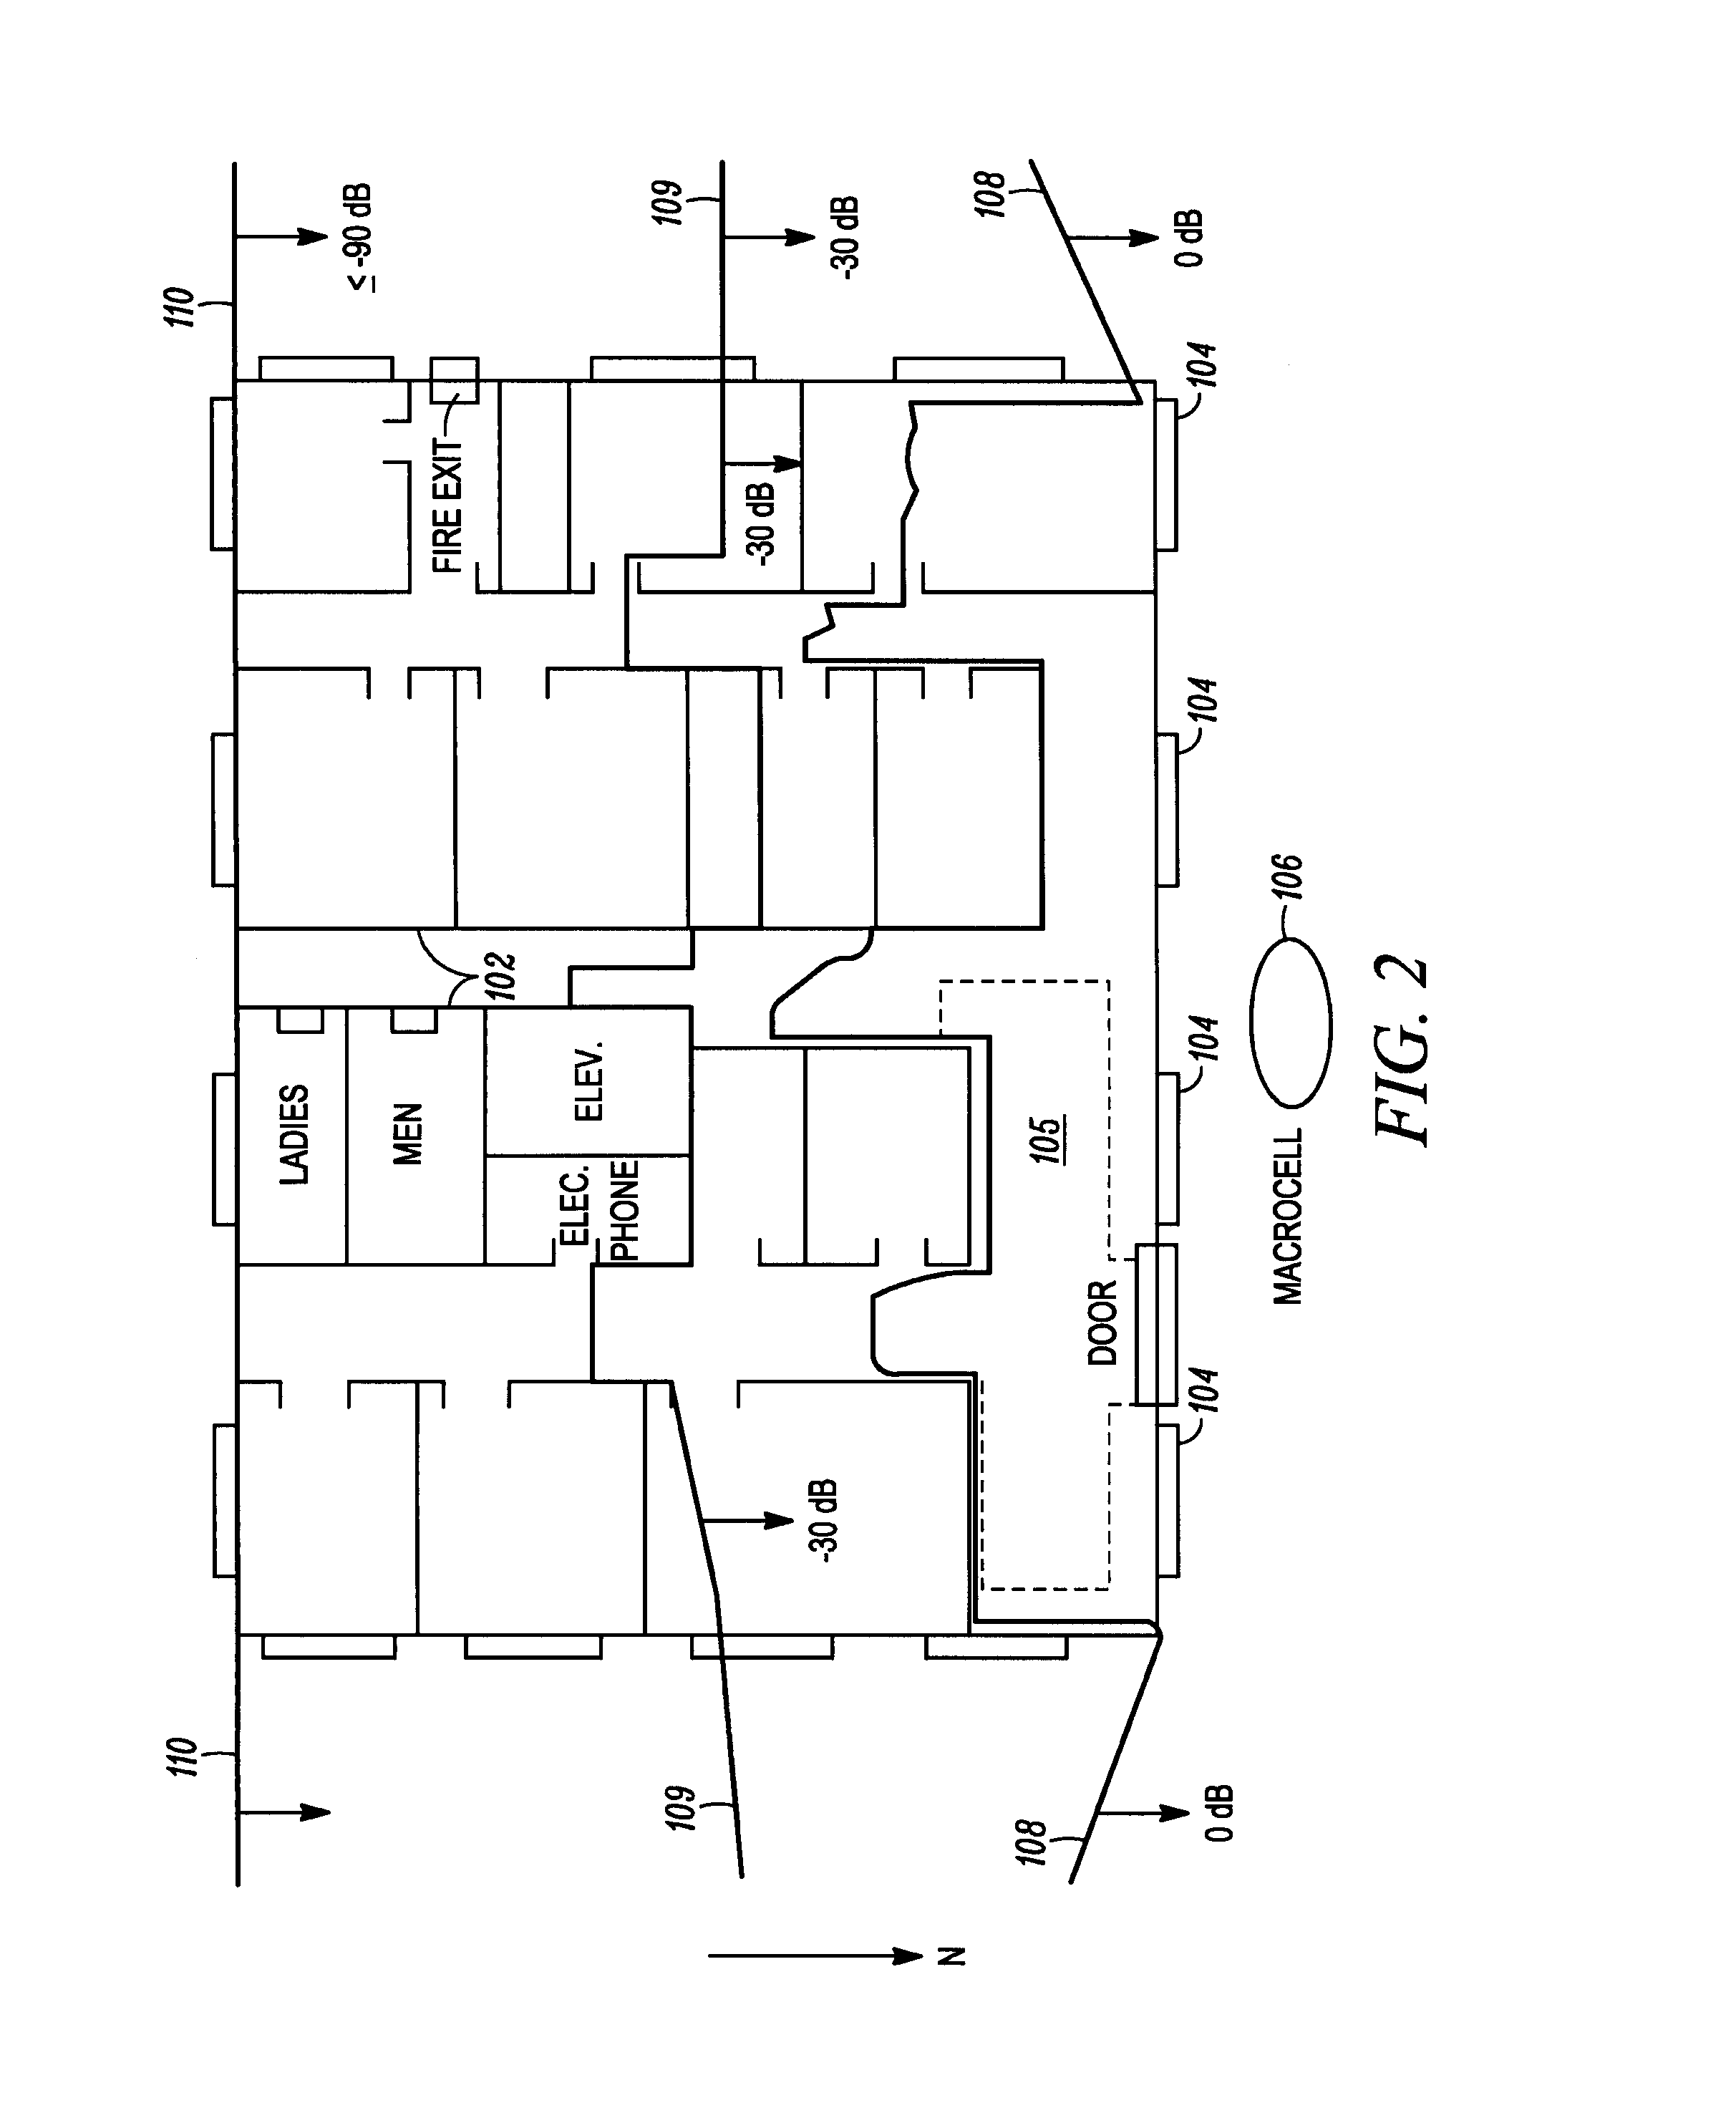 Method and system for designing or deploying a communications network which allows simultaneous selection of multiple components